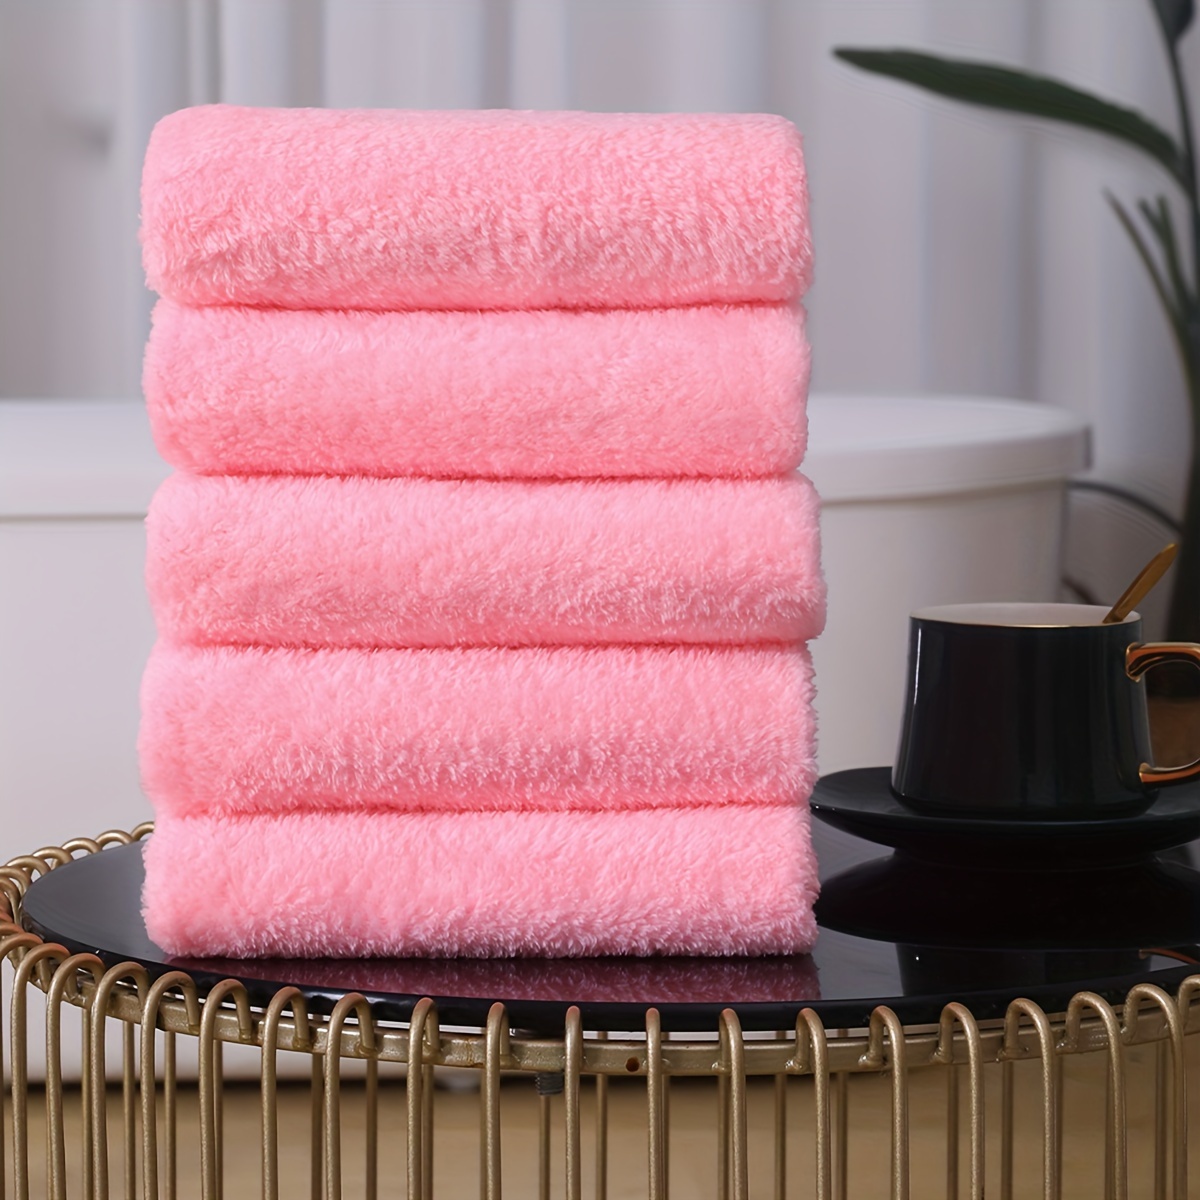 

5pcs Coral Fleece Towels, Super Absorbent, Non-shedding Bath Towels, Soft Thick Large Bathroom Spa Shower Gifts, Ideal Birthday/mother's Day Present For Grandma, Wife, Sister, Quick-dry Face Towels